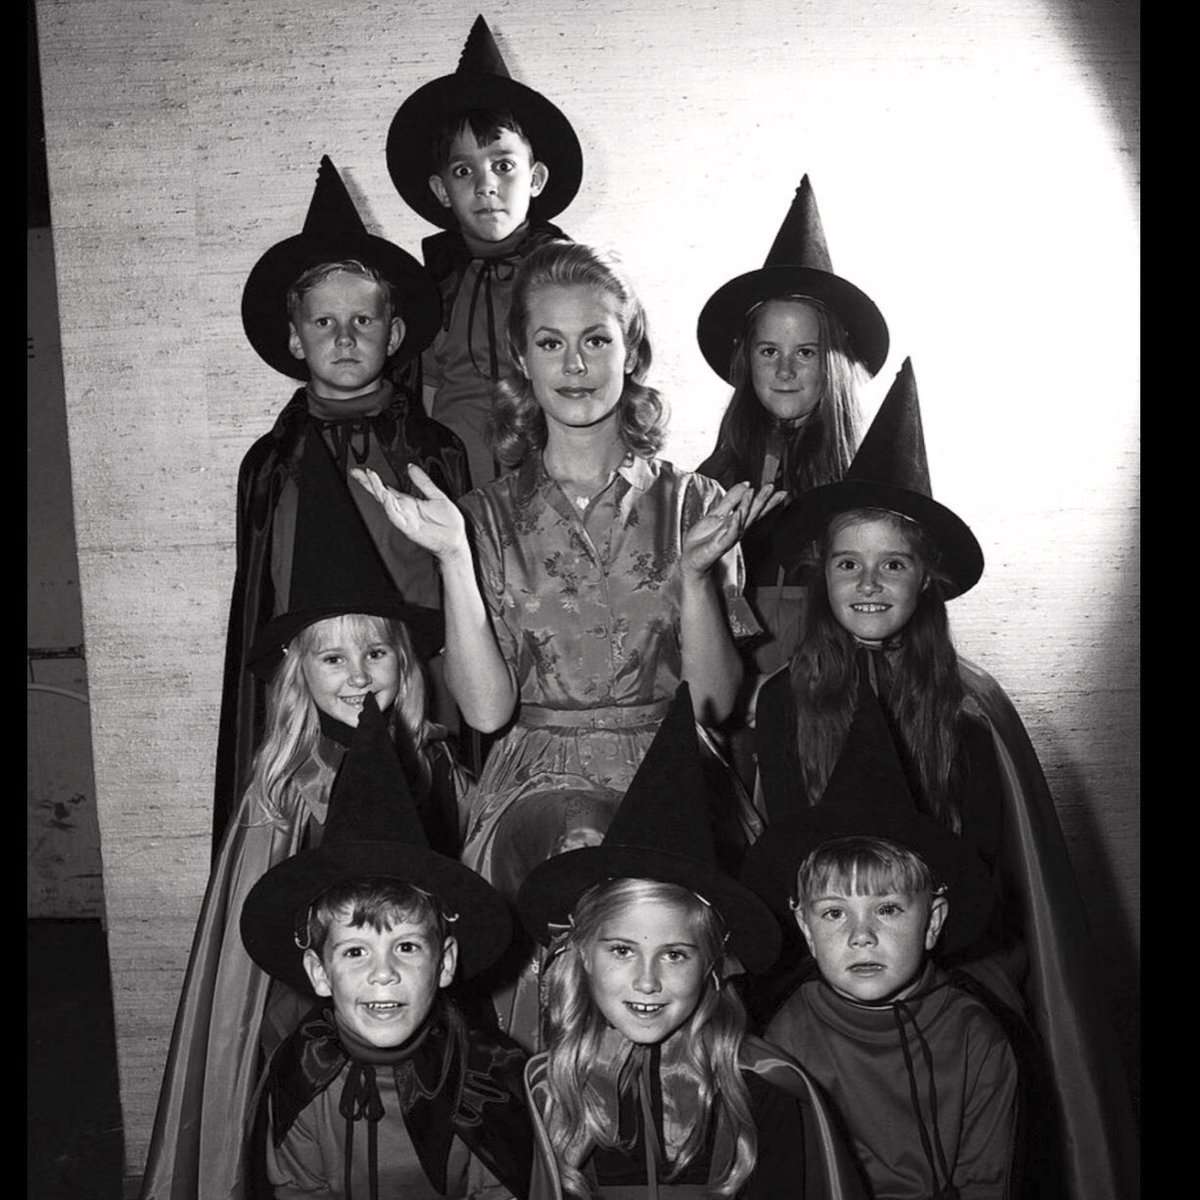 RT @MoMcCormick7: "Witching" you all a "Bewitching", fu...